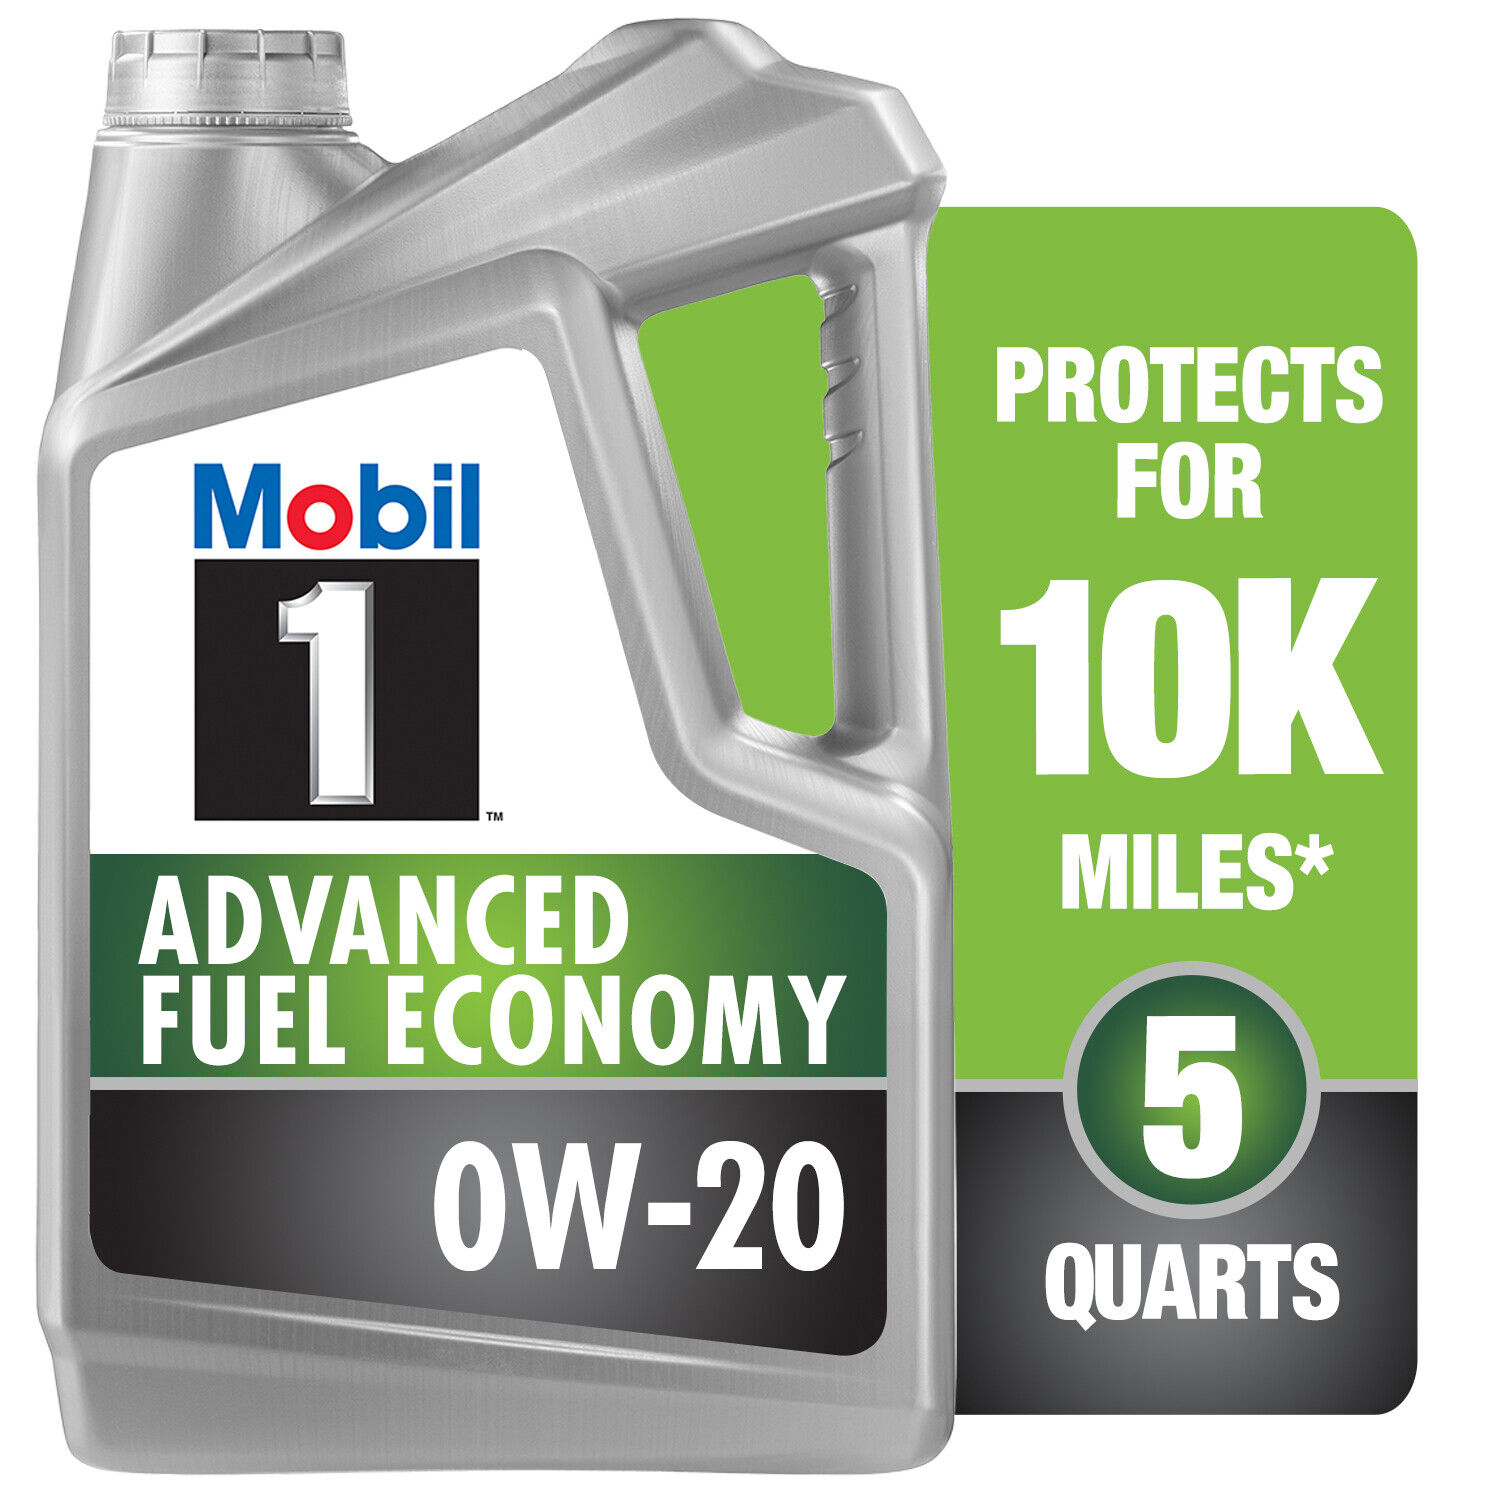 Mobil 1 Advanced Fuel Economy Full Synthetic Motor Oil 0W-20  5 qt Protection